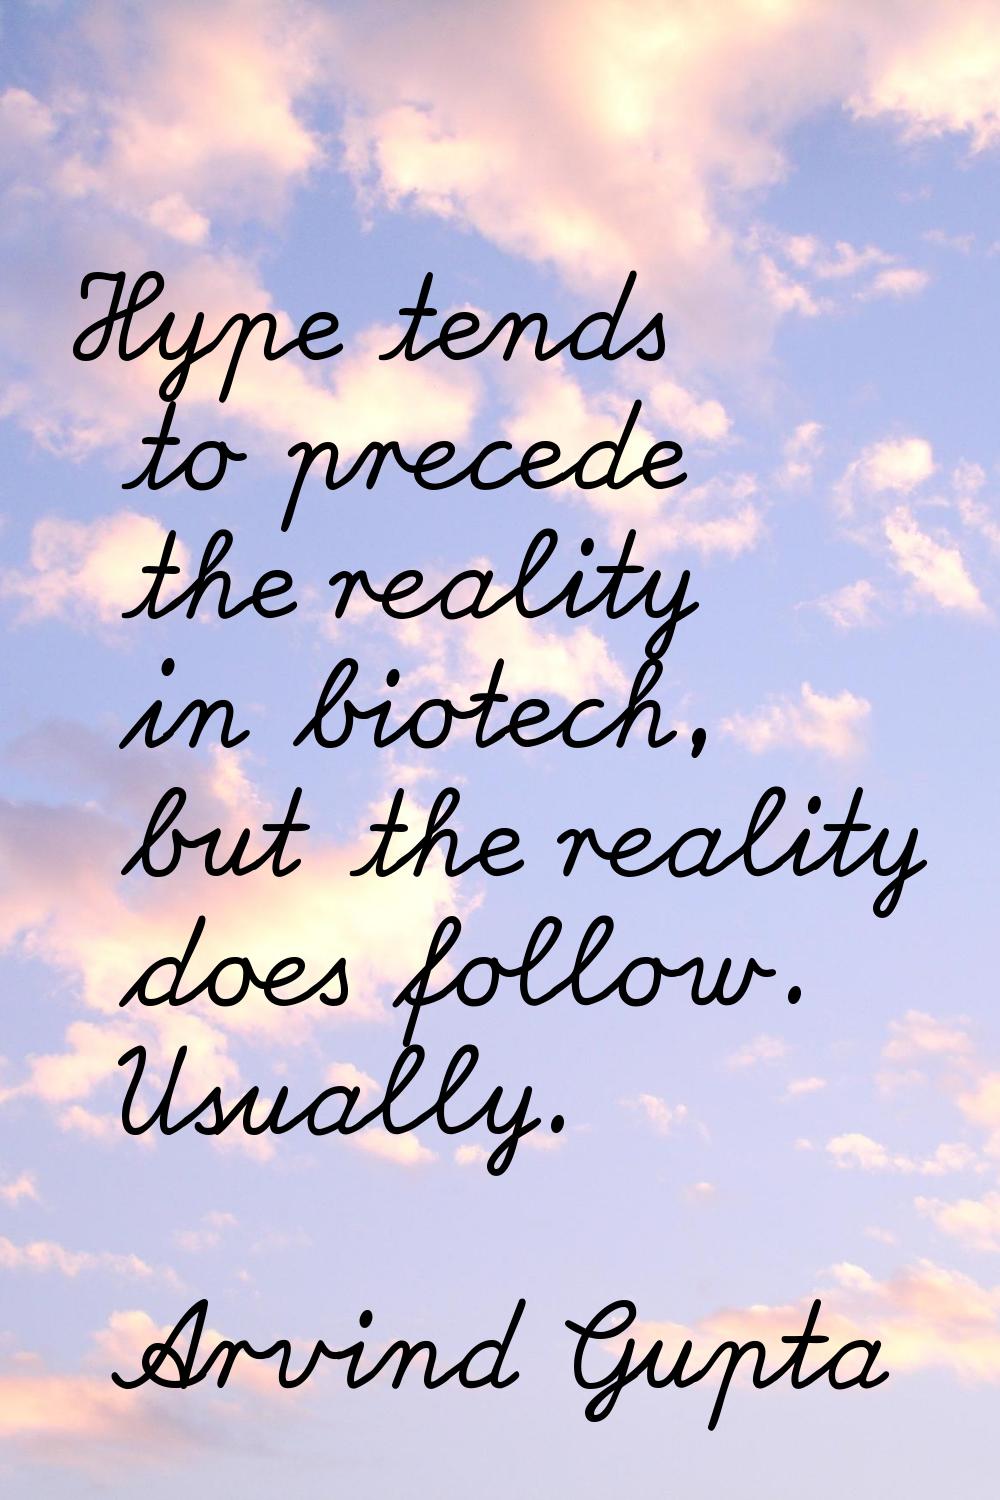 Hype tends to precede the reality in biotech, but the reality does follow. Usually.